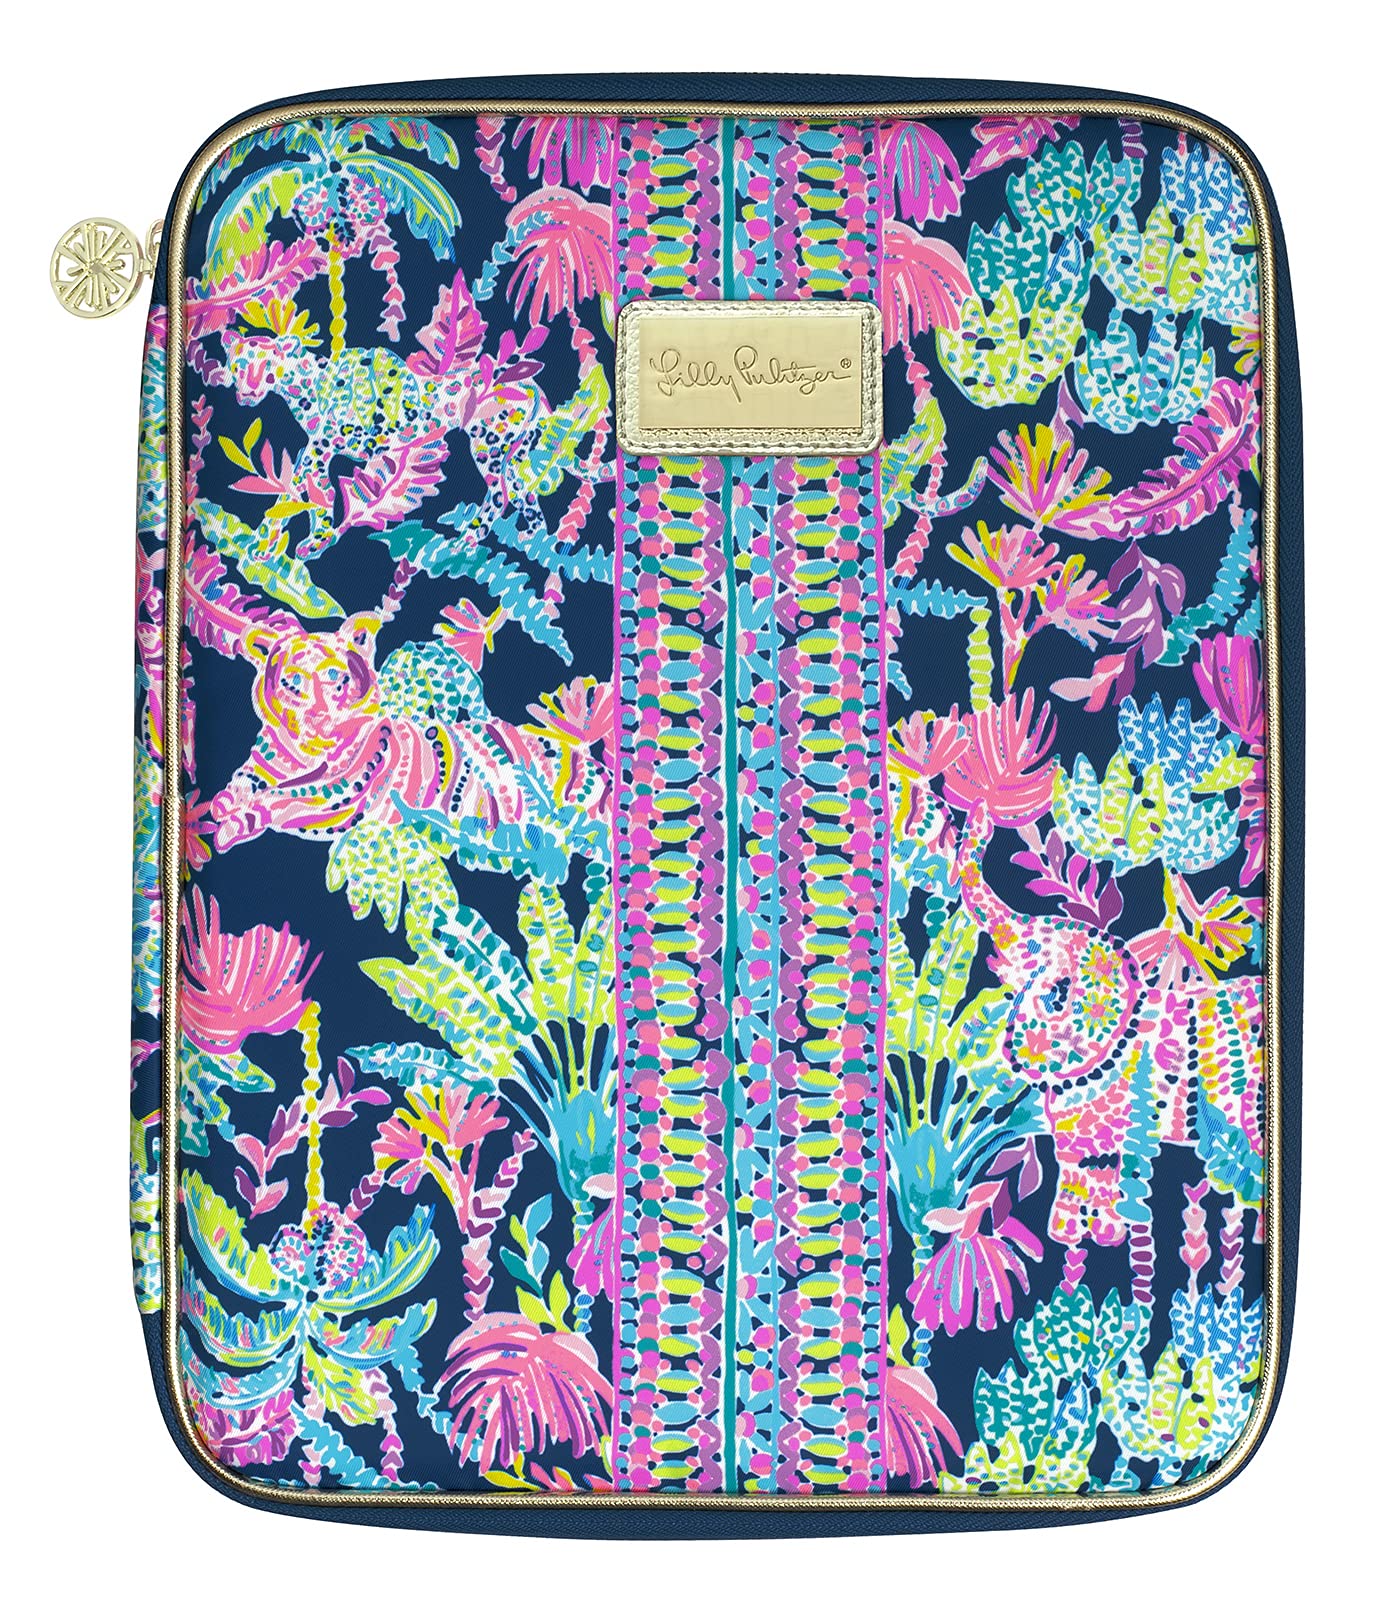 Lilly Pulitzer Agenda Folio with Interior Pockets and Zip Close, Travel Portfolio Sized to Fit All Lilly Personal Planners, Seen and Herd